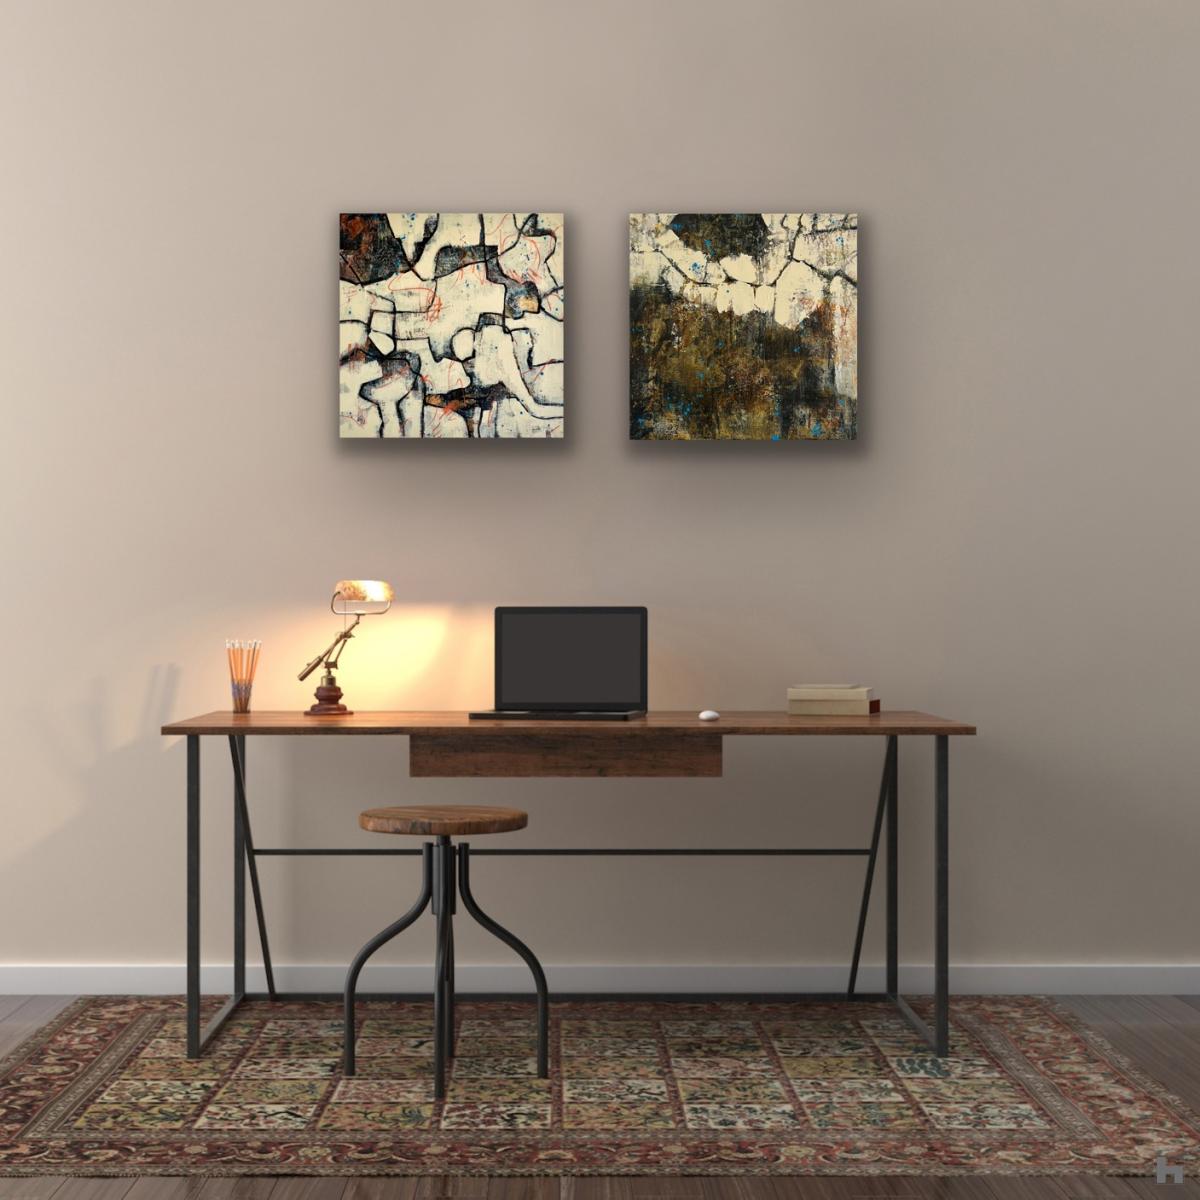 Two small black paintings hanging on a wall above a desk